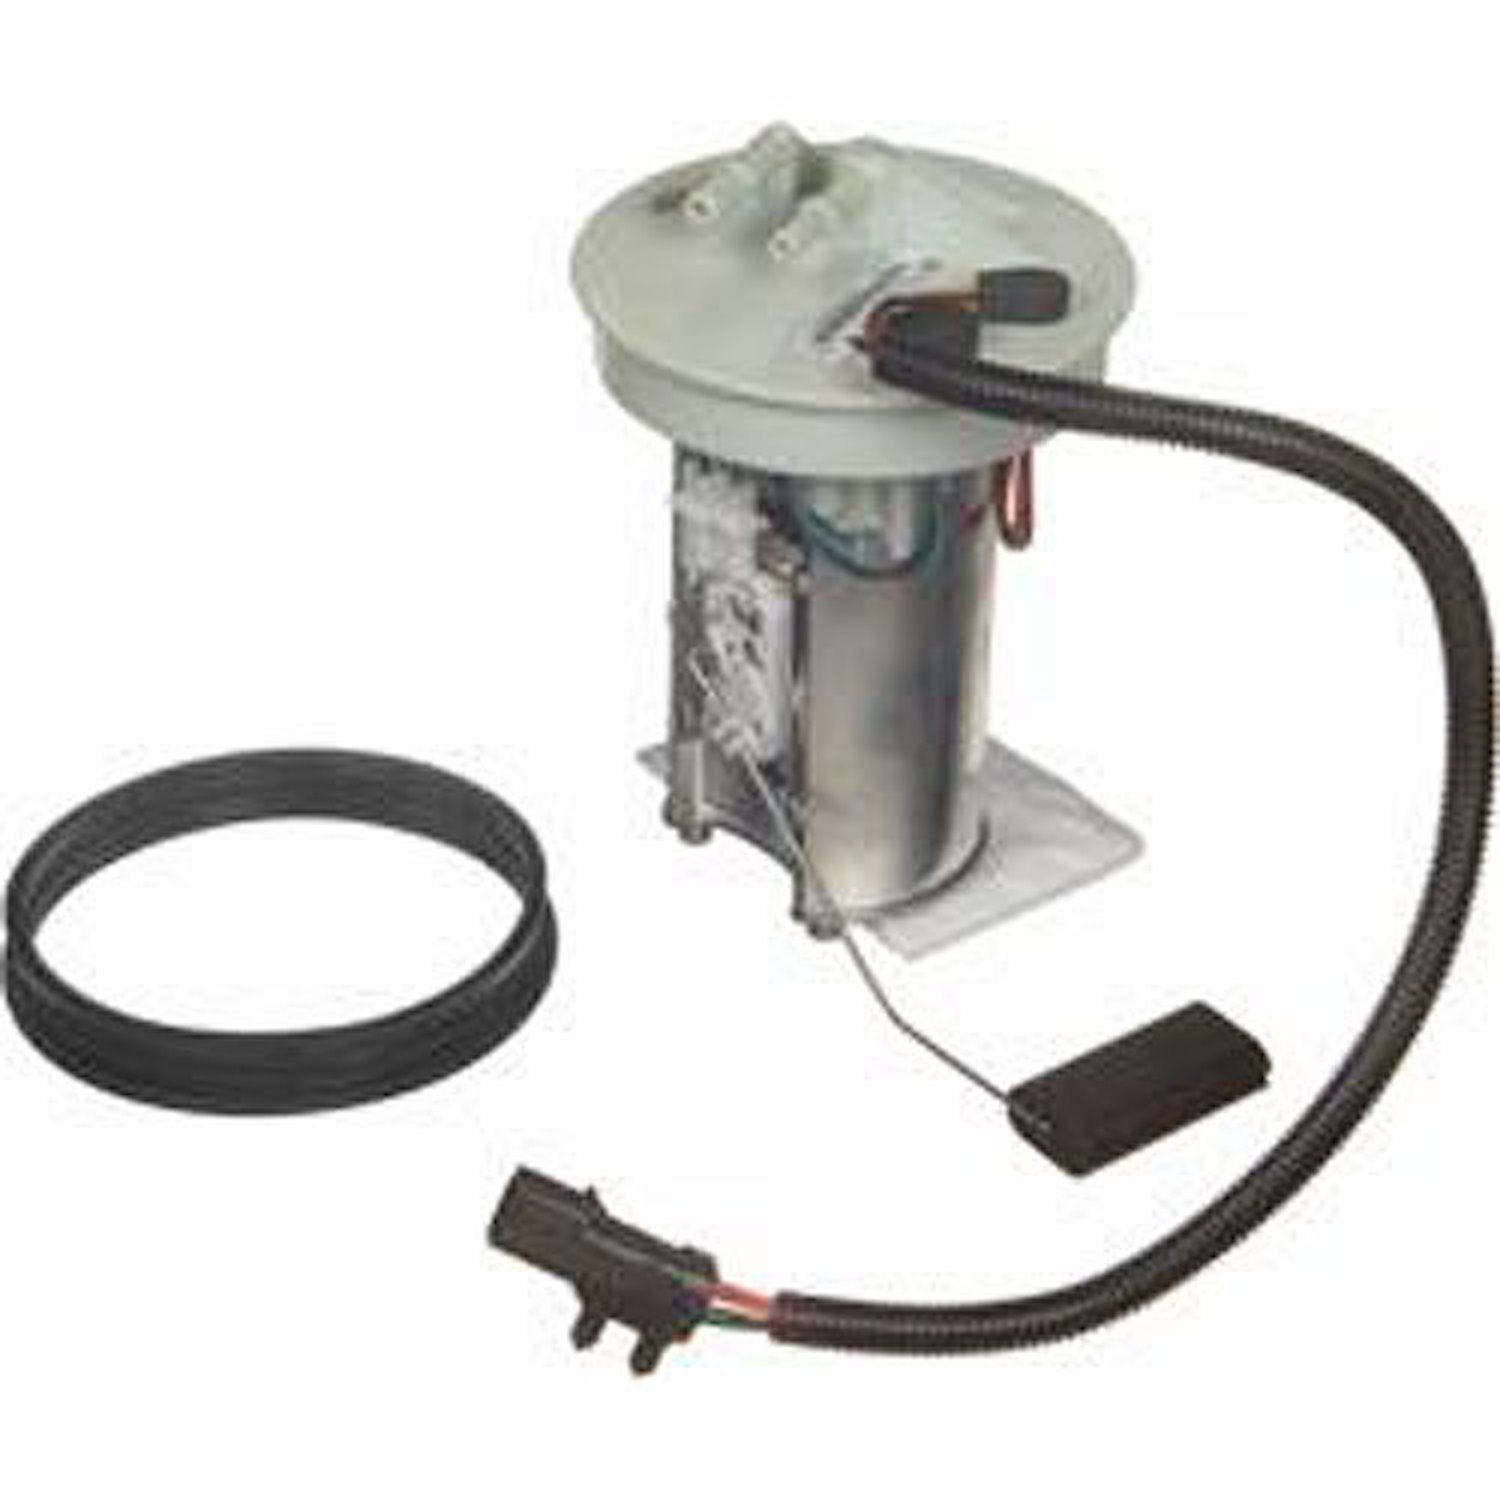 OE Chrysler/Dodge/Jeep Replacement Electric Fuel Pump Module Assembly 1999-03 Jeep Grand Cherokee 4.0L L6/4.7L V8